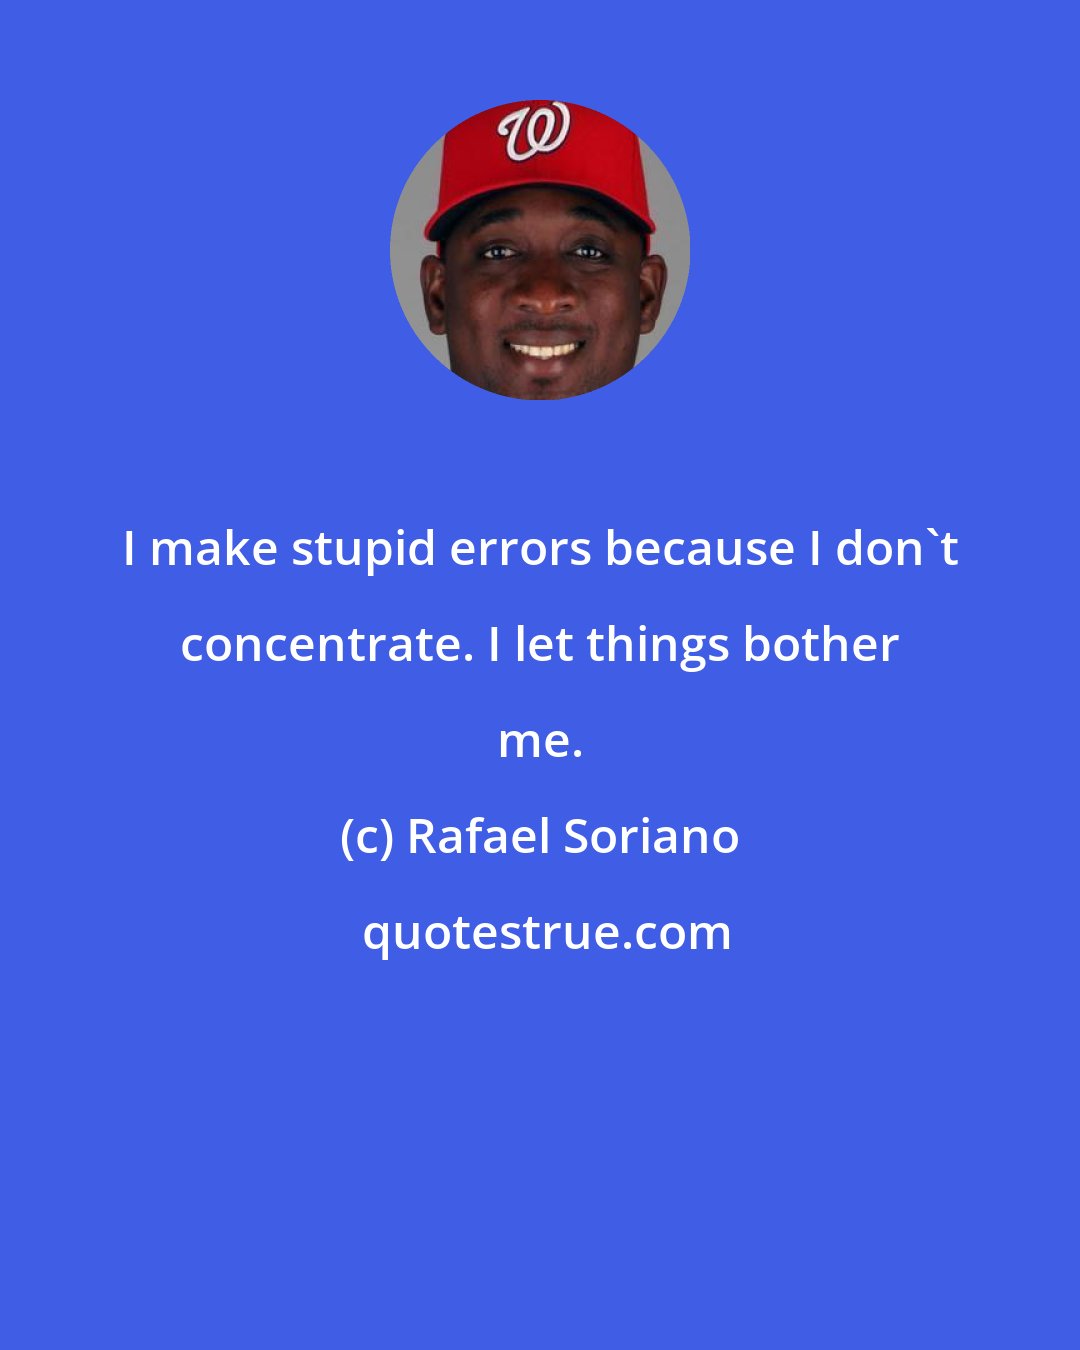 Rafael Soriano: I make stupid errors because I don't concentrate. I let things bother me.